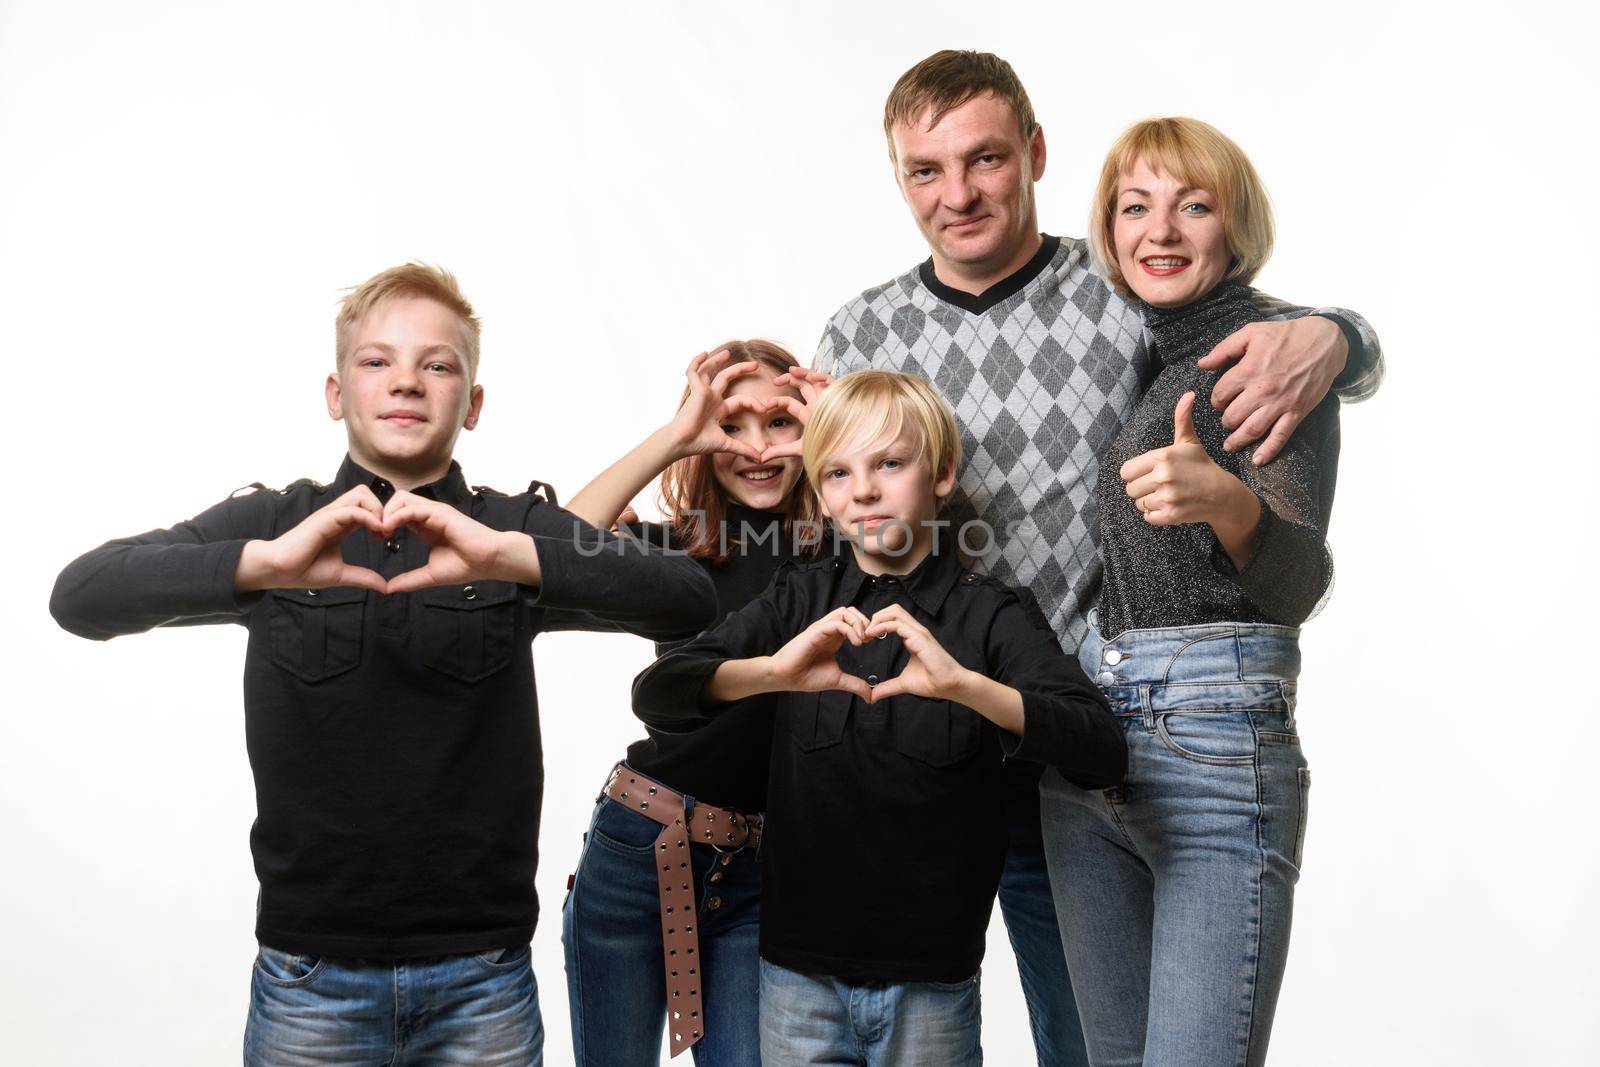 Portrait of an ordinary large family, teenagers show a gesture in the shape of a heart and joyfully look into the frame by Madhourse